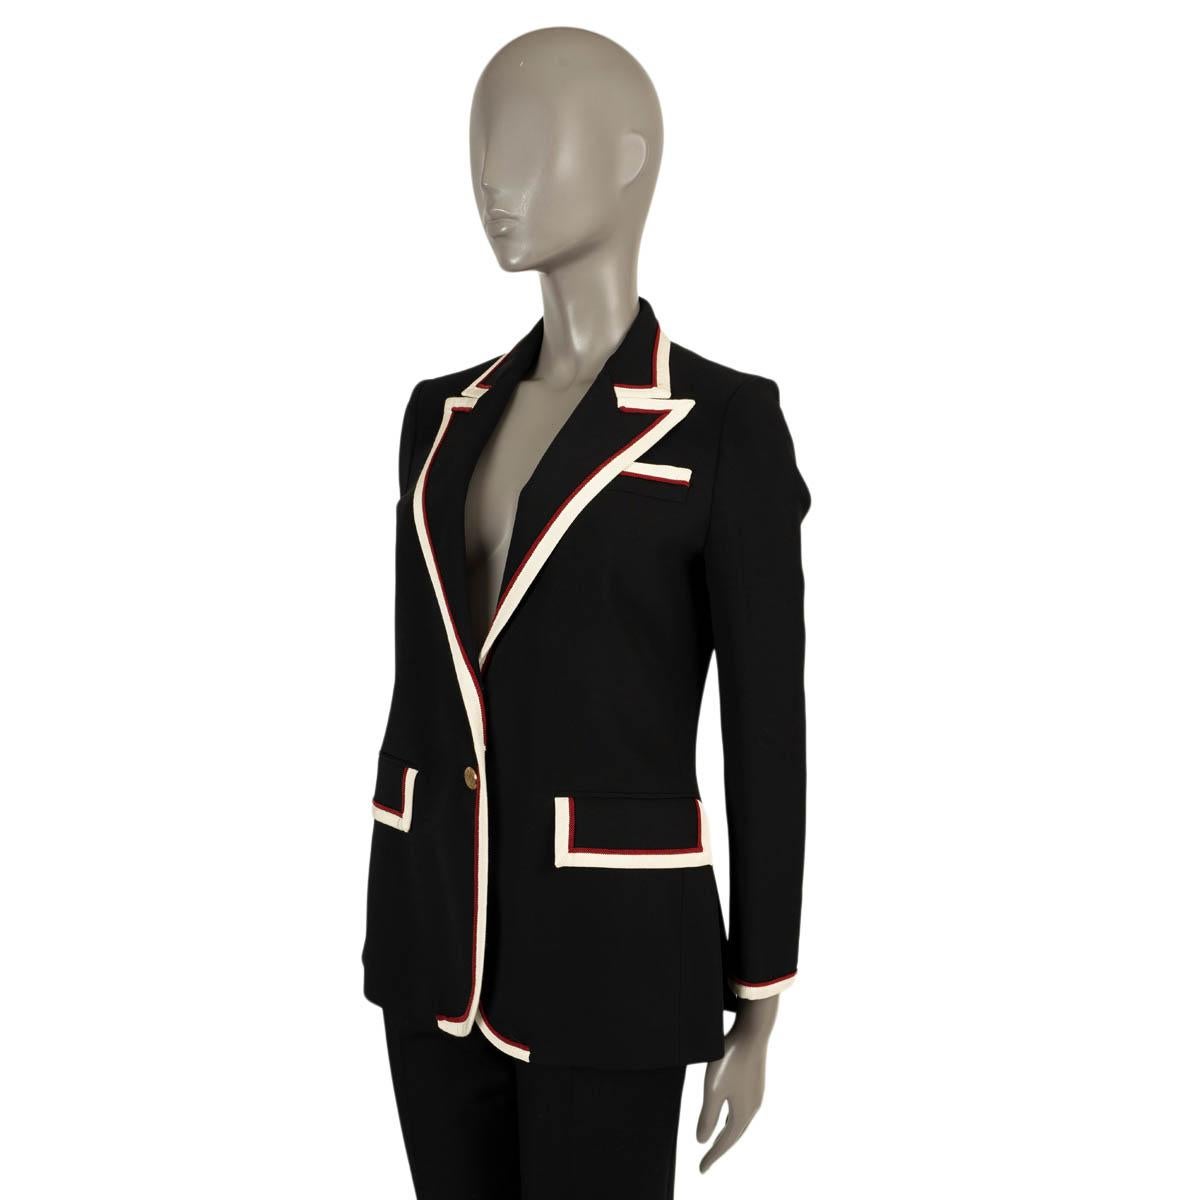 100% authentic Gucci stretch cady blazer in black viscose (with 3% elastane). Features white and red grosgrain trim, peak lapels, buttoned cuffs and two flap pockets. Closes with two gold-tone buttons on the front and is lined in printed silk